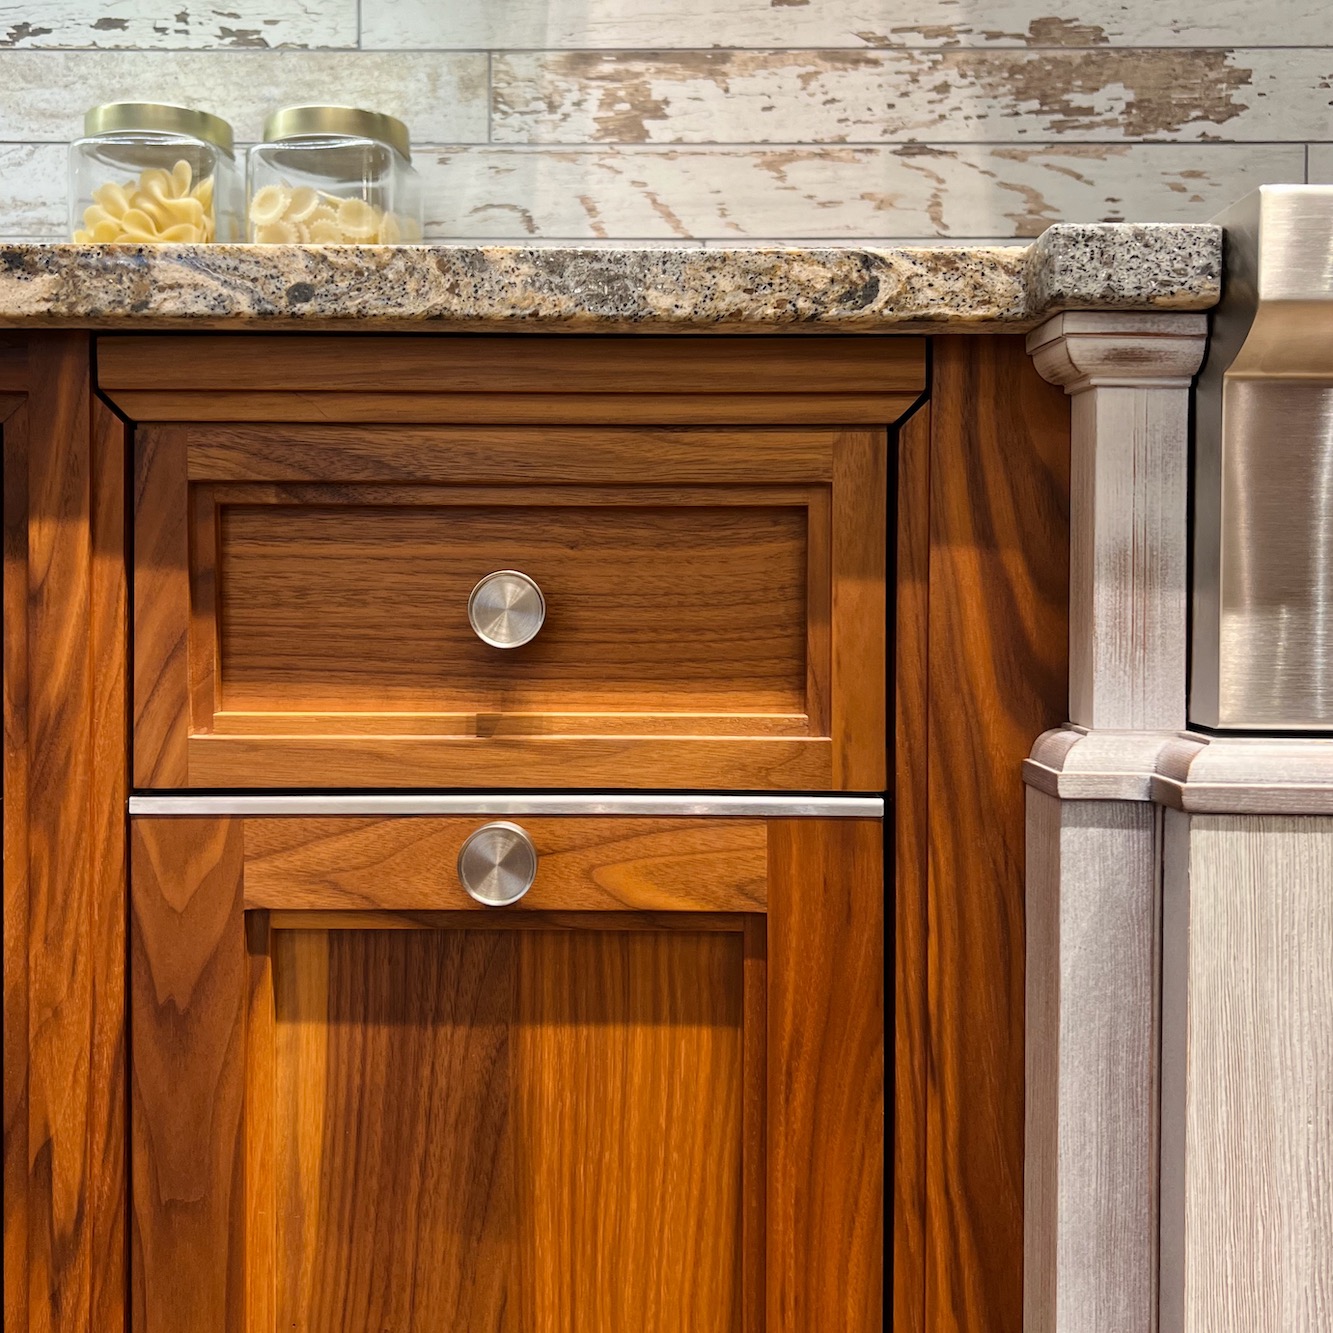 hidden cutting board - Crown Point Cabinetry